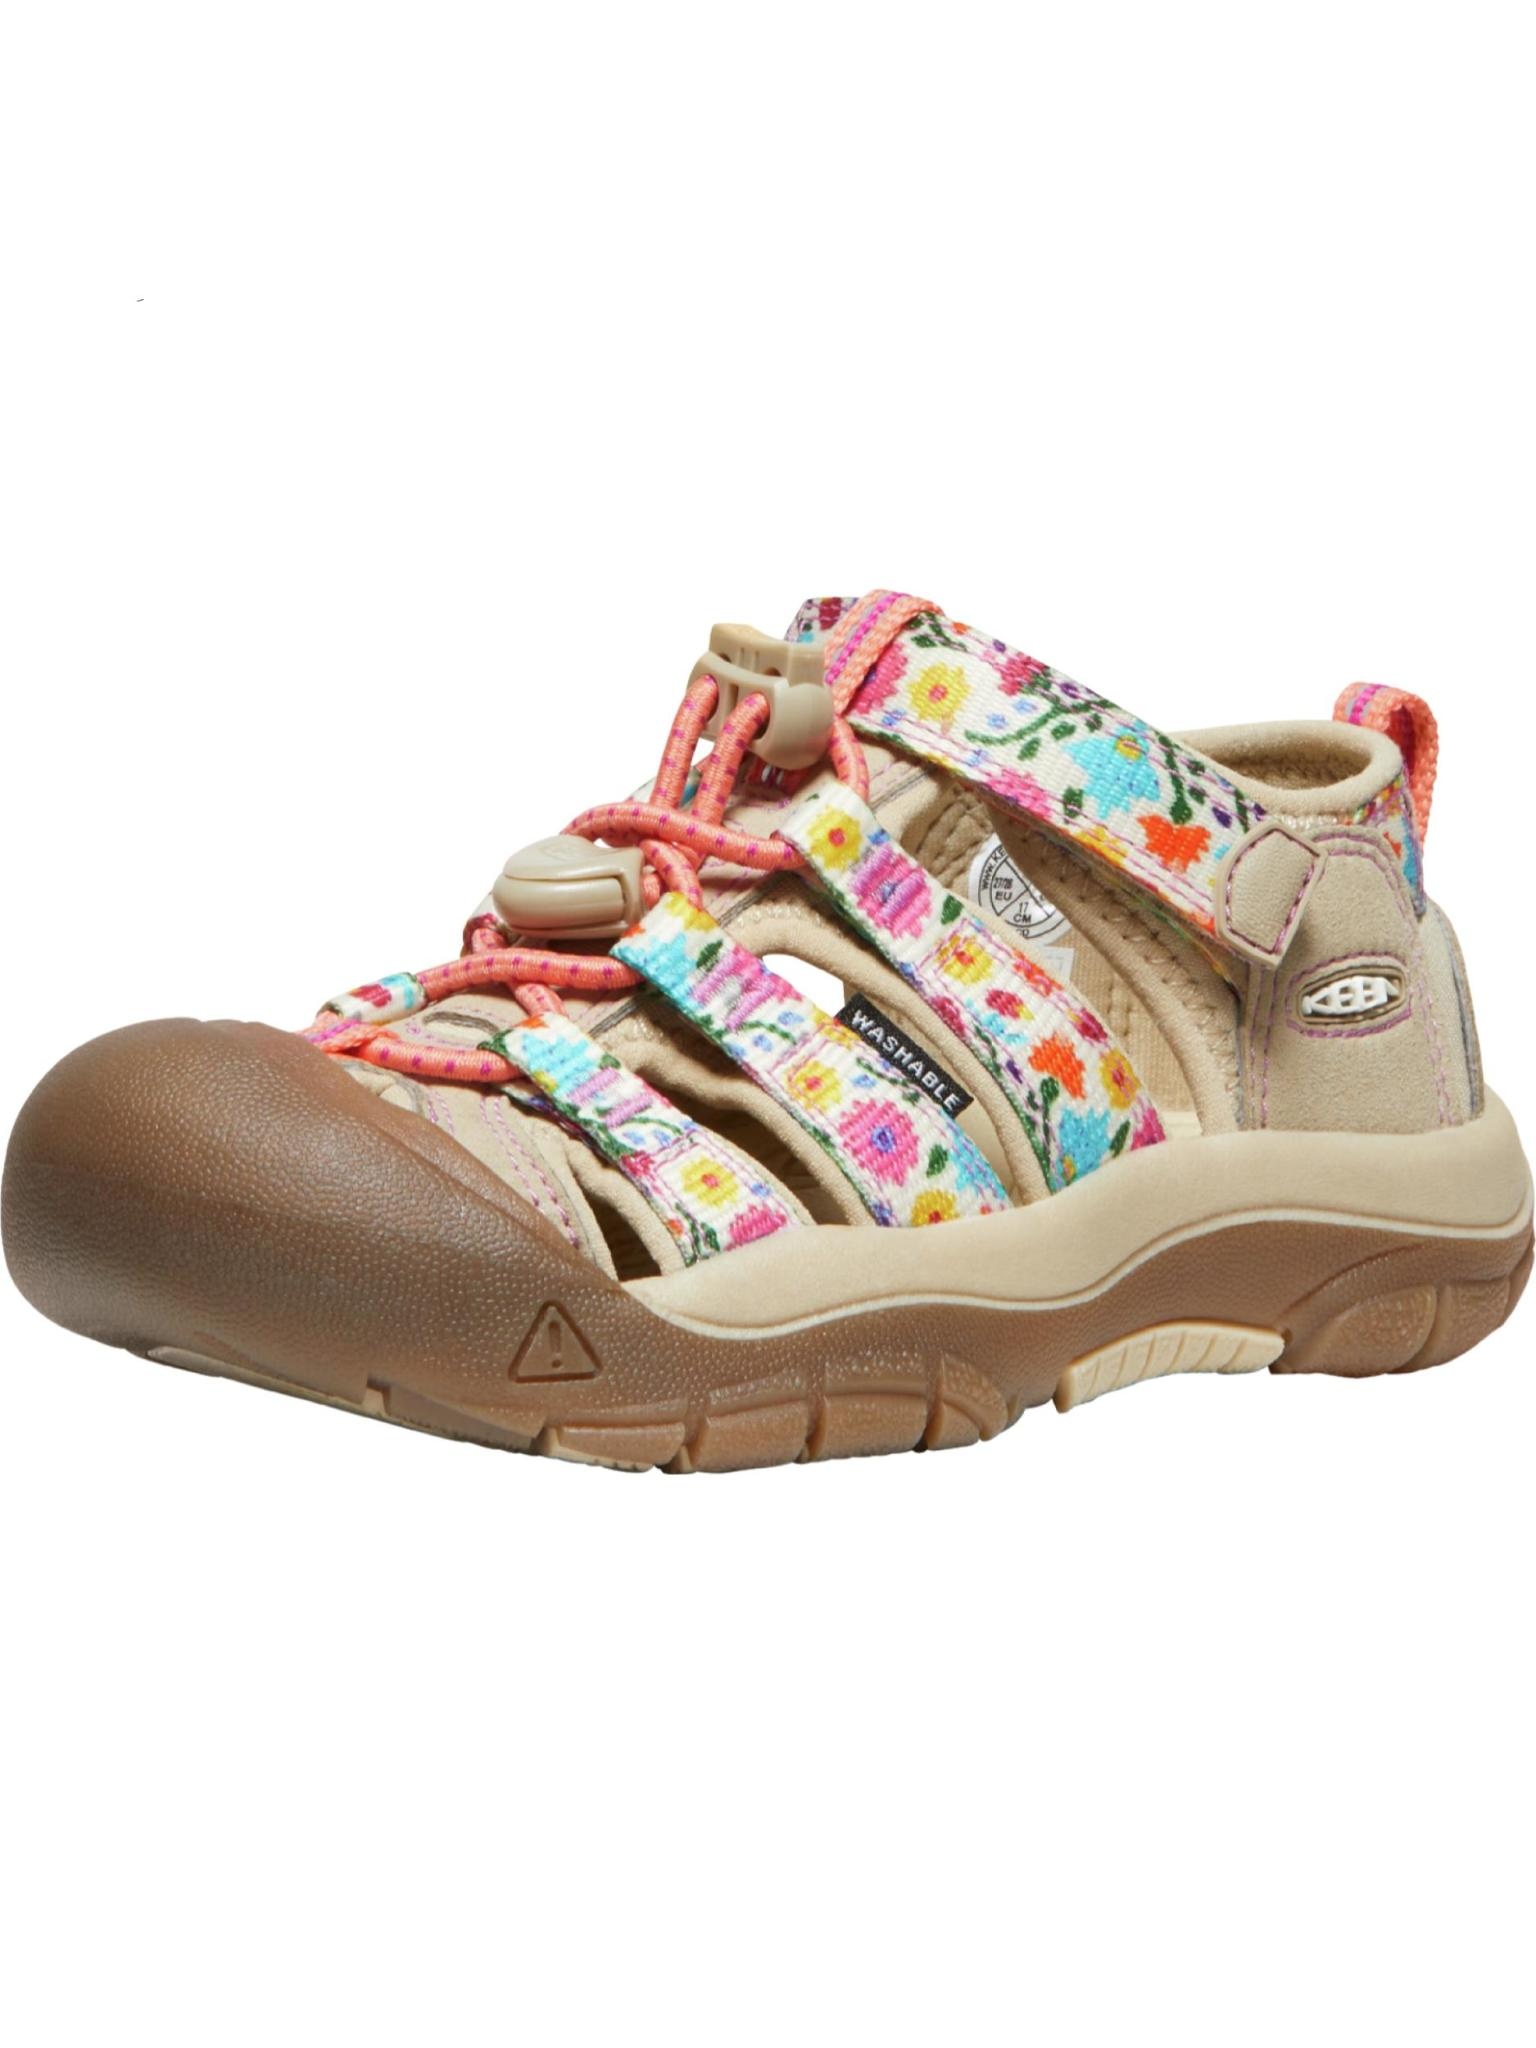 Kid's Newport H2 Sandal - Chatham Outfitters